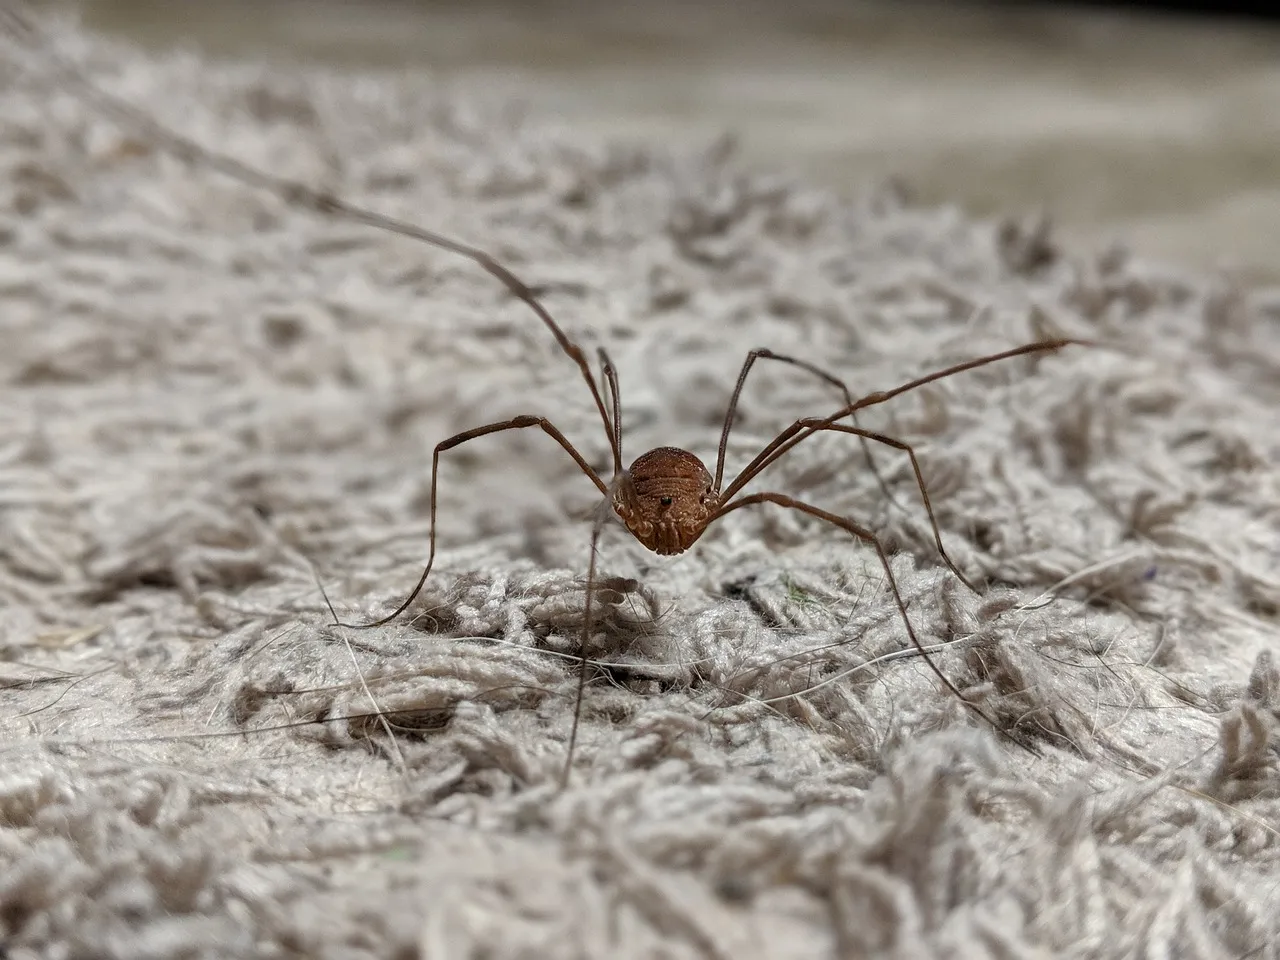 Close-up of a spider on a carpet, highlighting the importance of reliable Lake Nona pest control services to maintain a pest-free home.